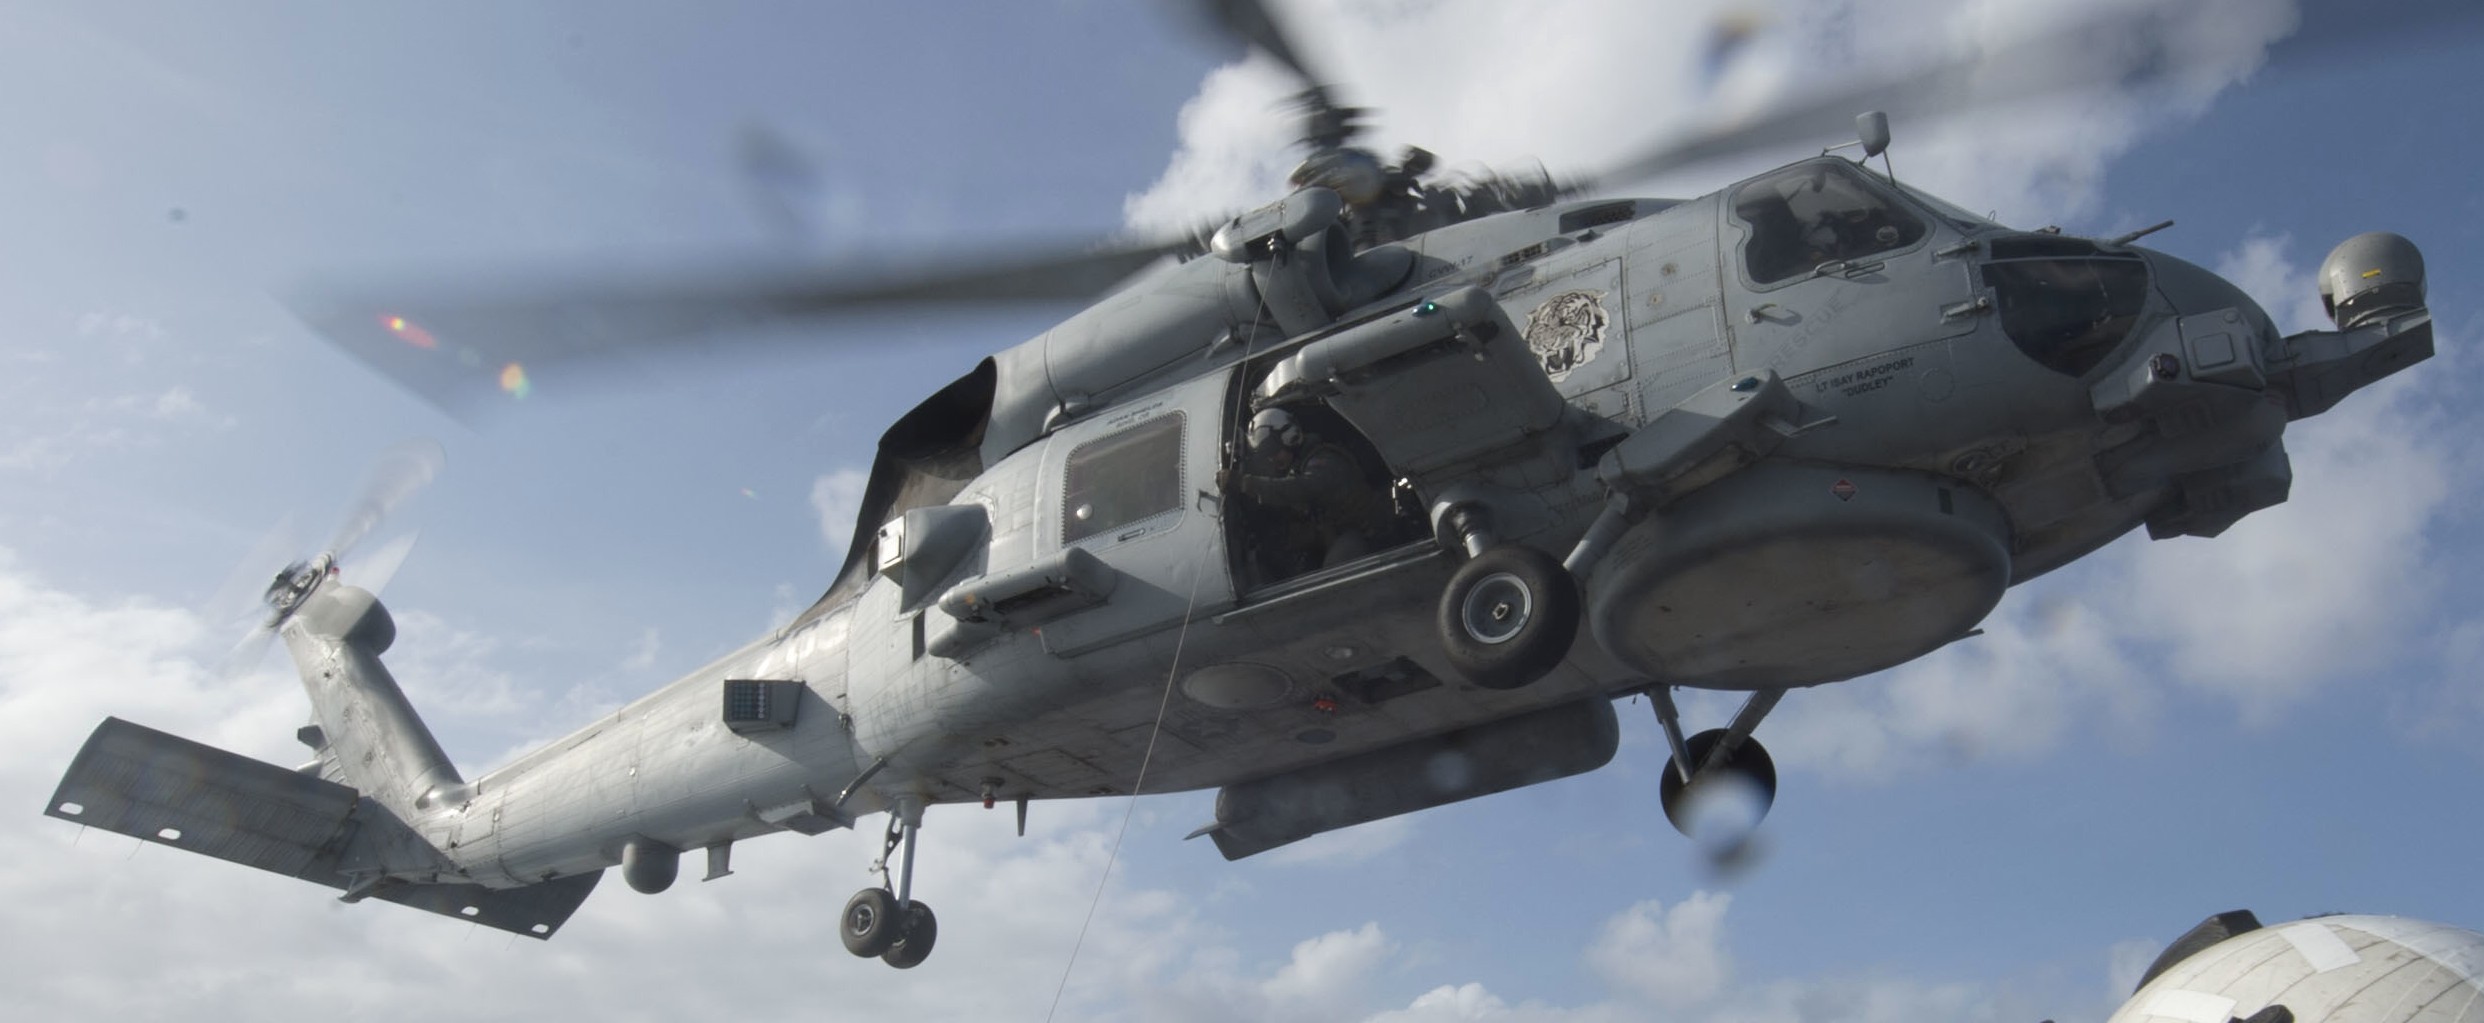 hsm-73 battlecats helicopter maritime strike squadron us navy mh-60r seahawk 2015 12